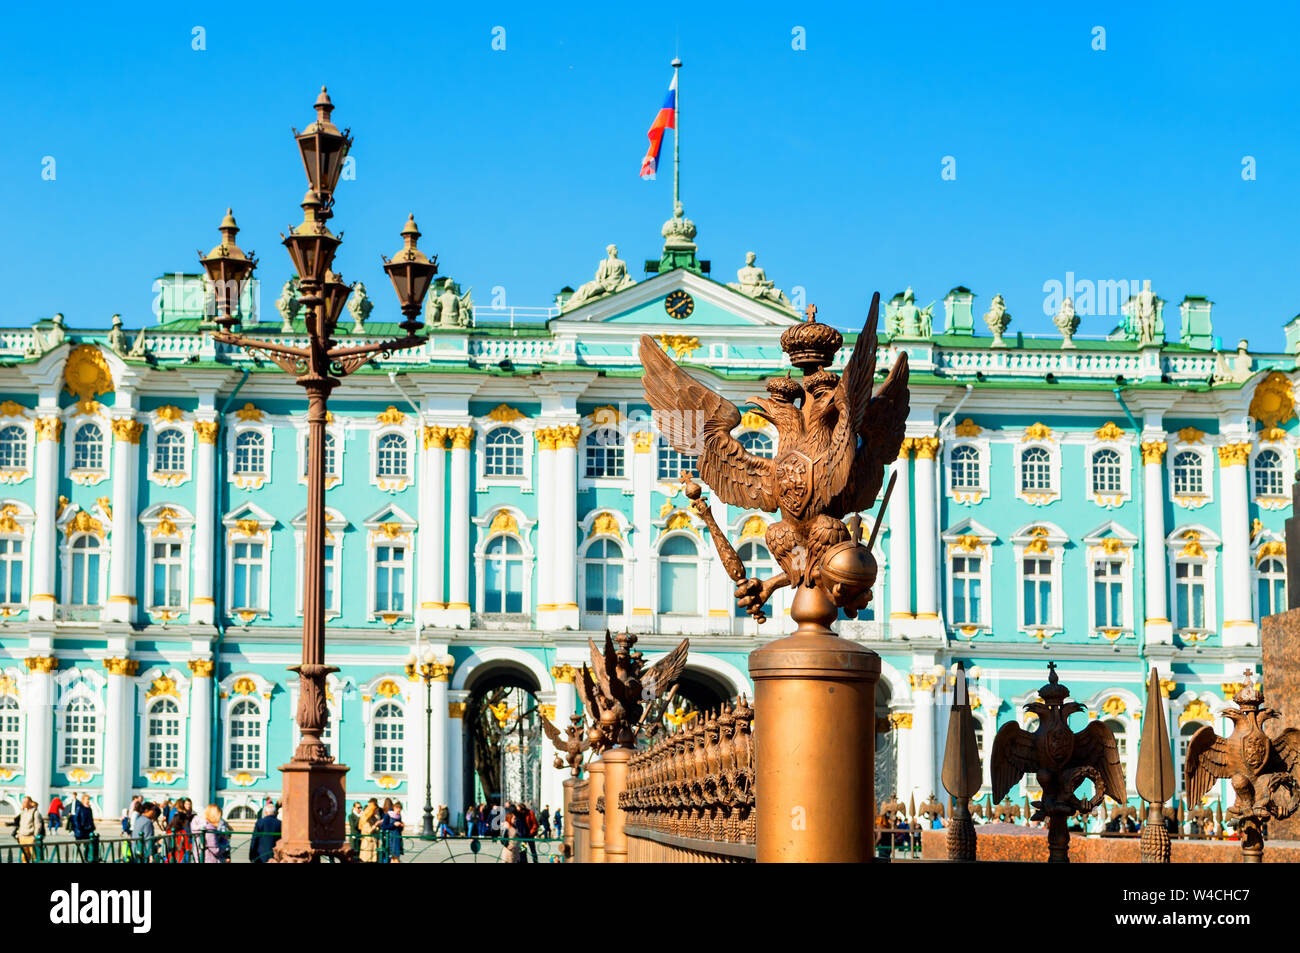 Saint Petersburg, Russia - April 5, 2019. Winter Palace and Hermitage Museum Building. The Winter Palace was the official residence of the Russian Emp Stock Photo